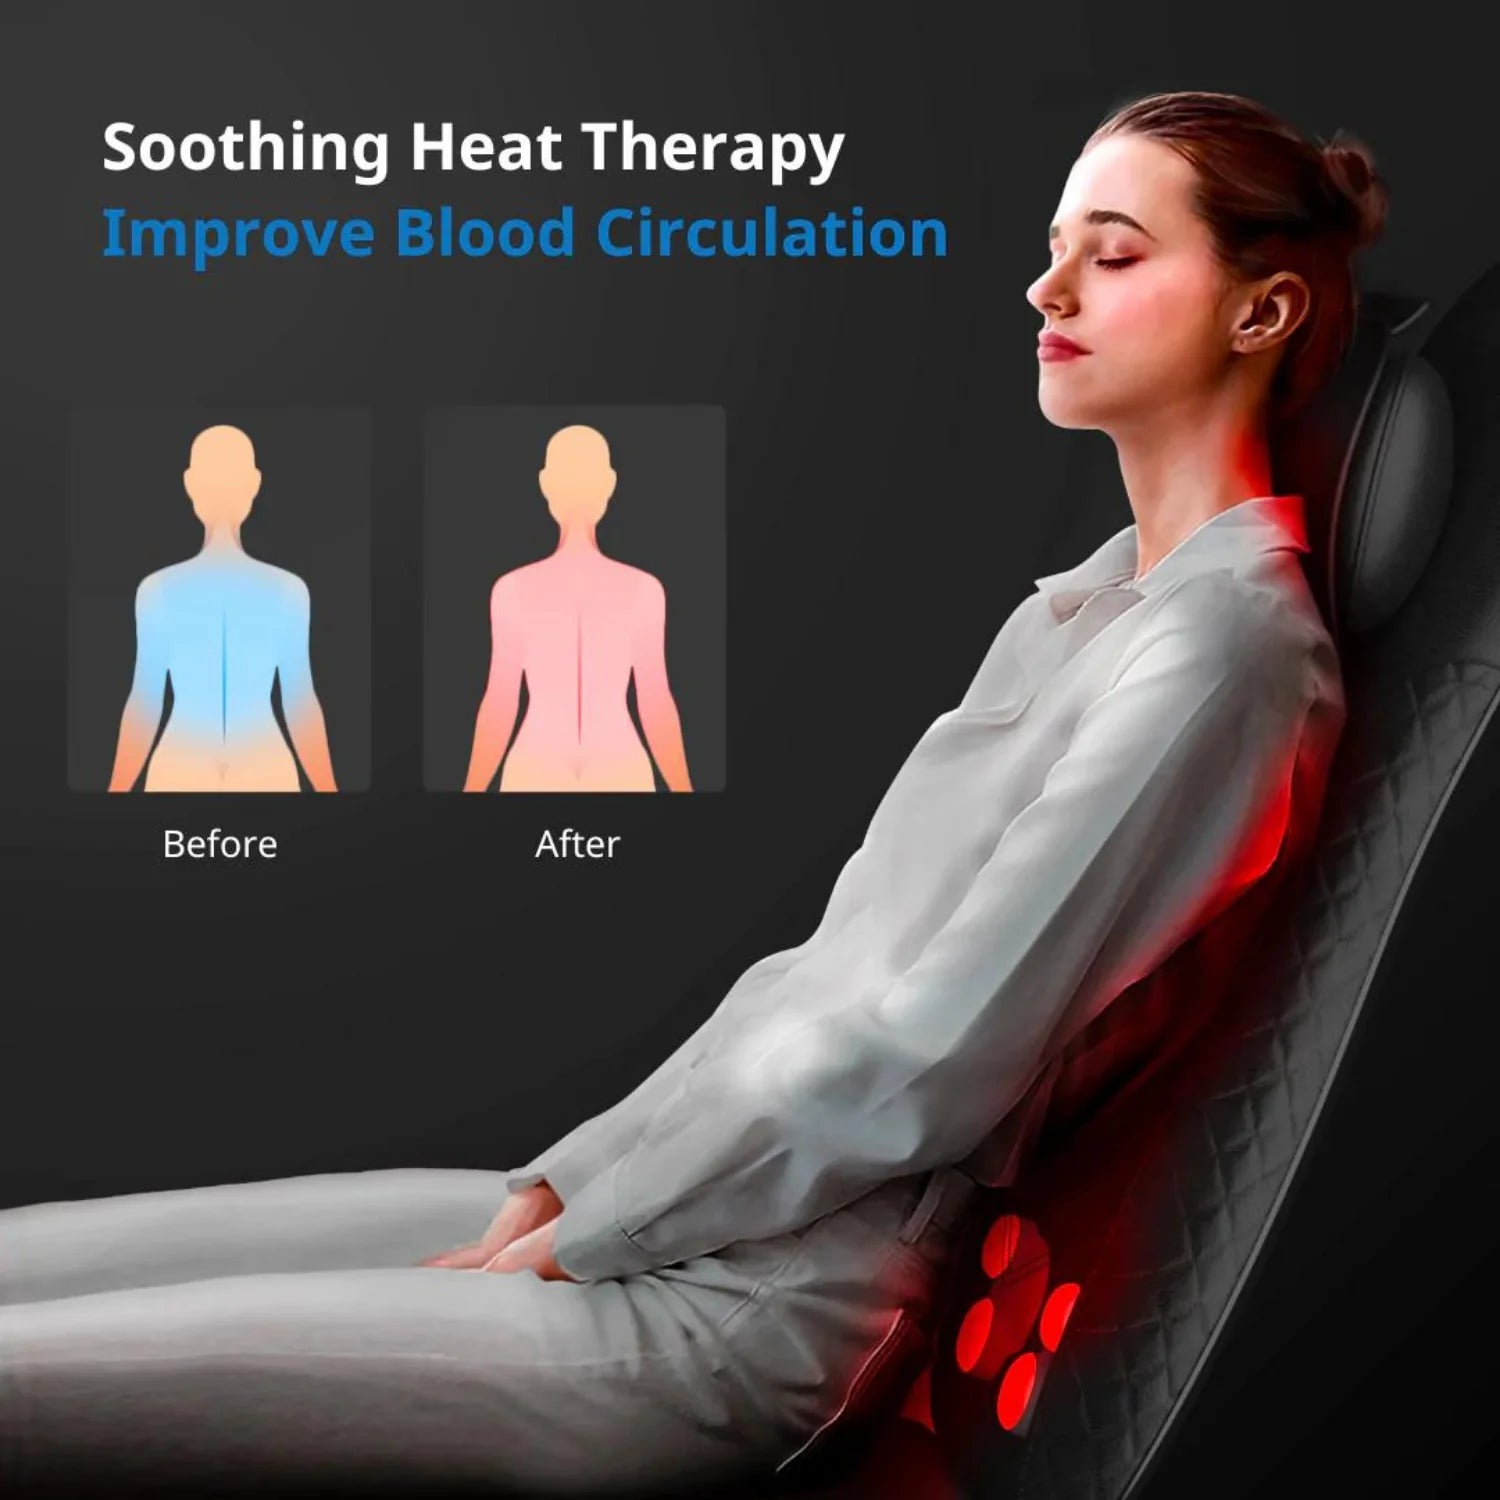 RENPHO Back Massager with Heat, Shiatsu Chair Massage Pad for Neck